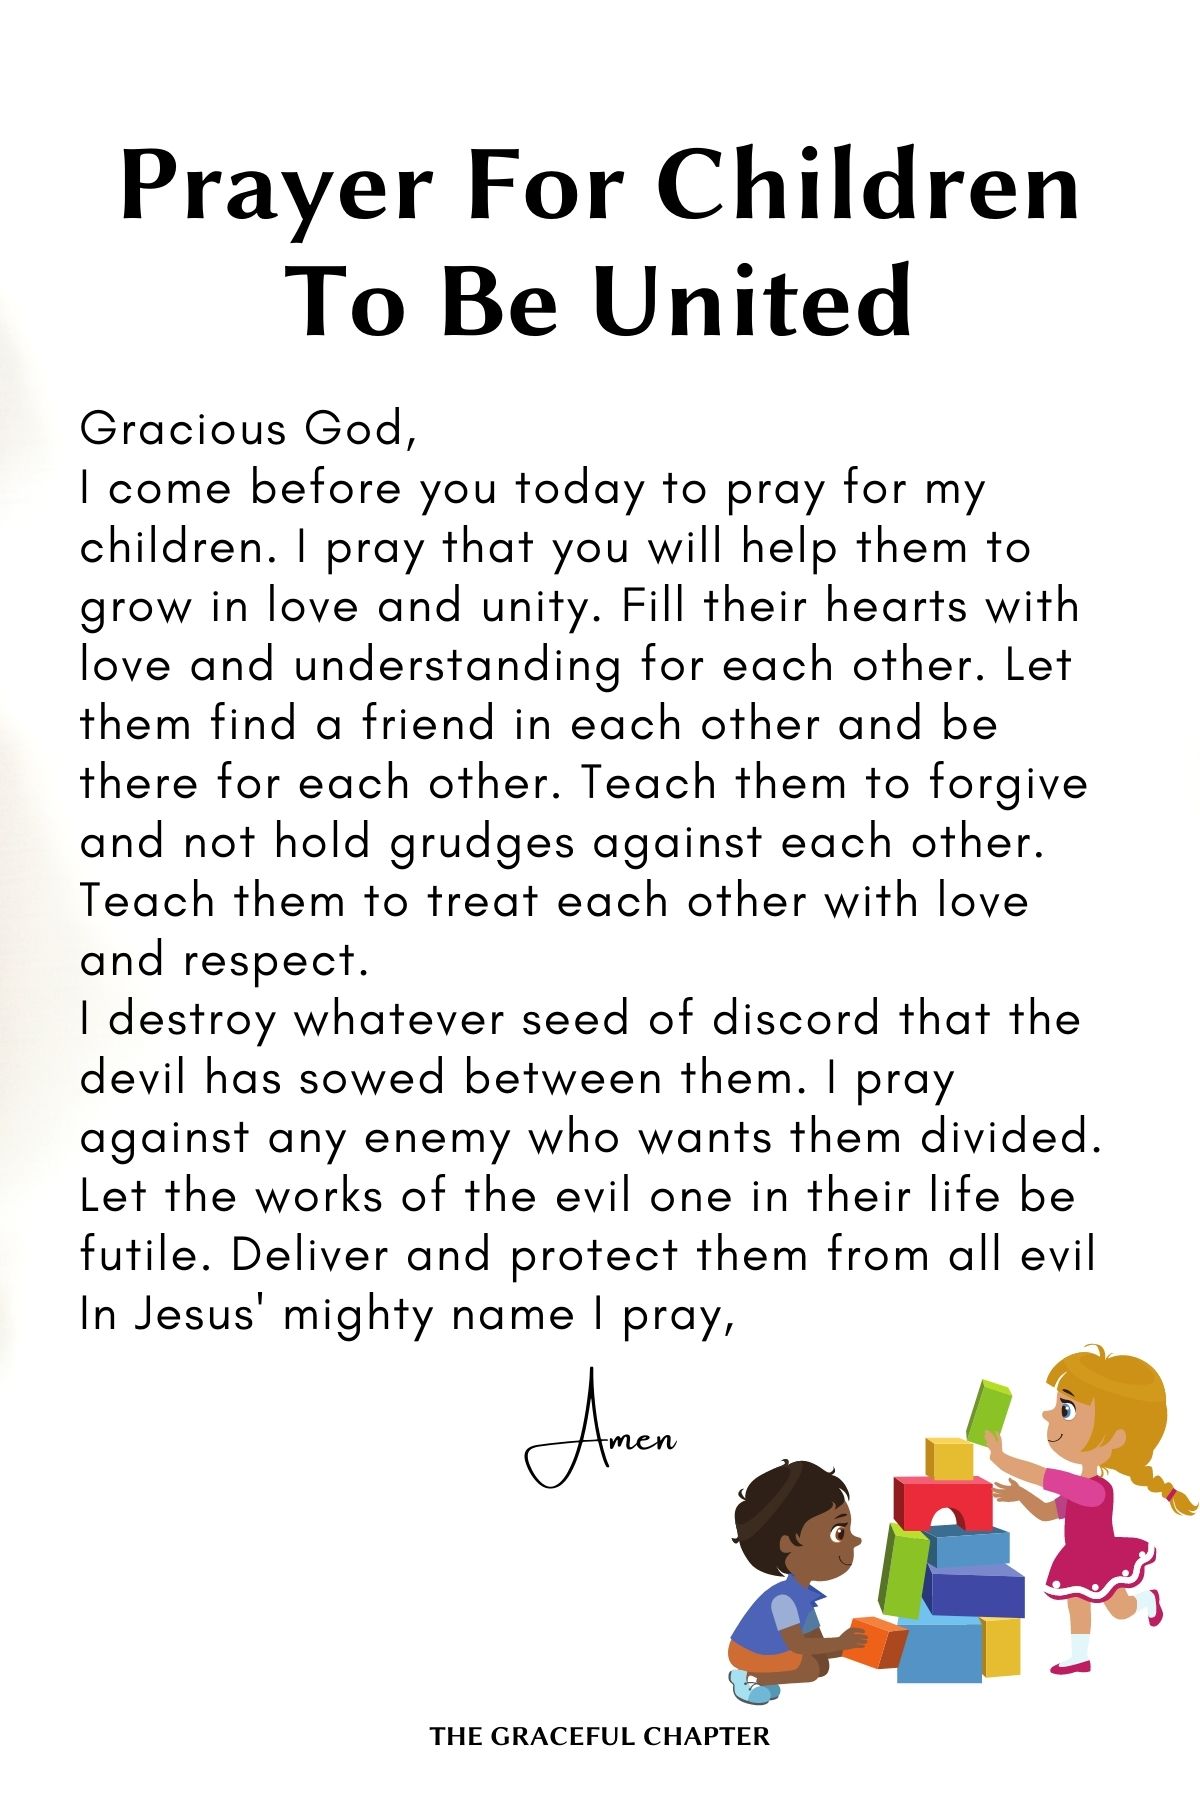 Prayer for your children to be united